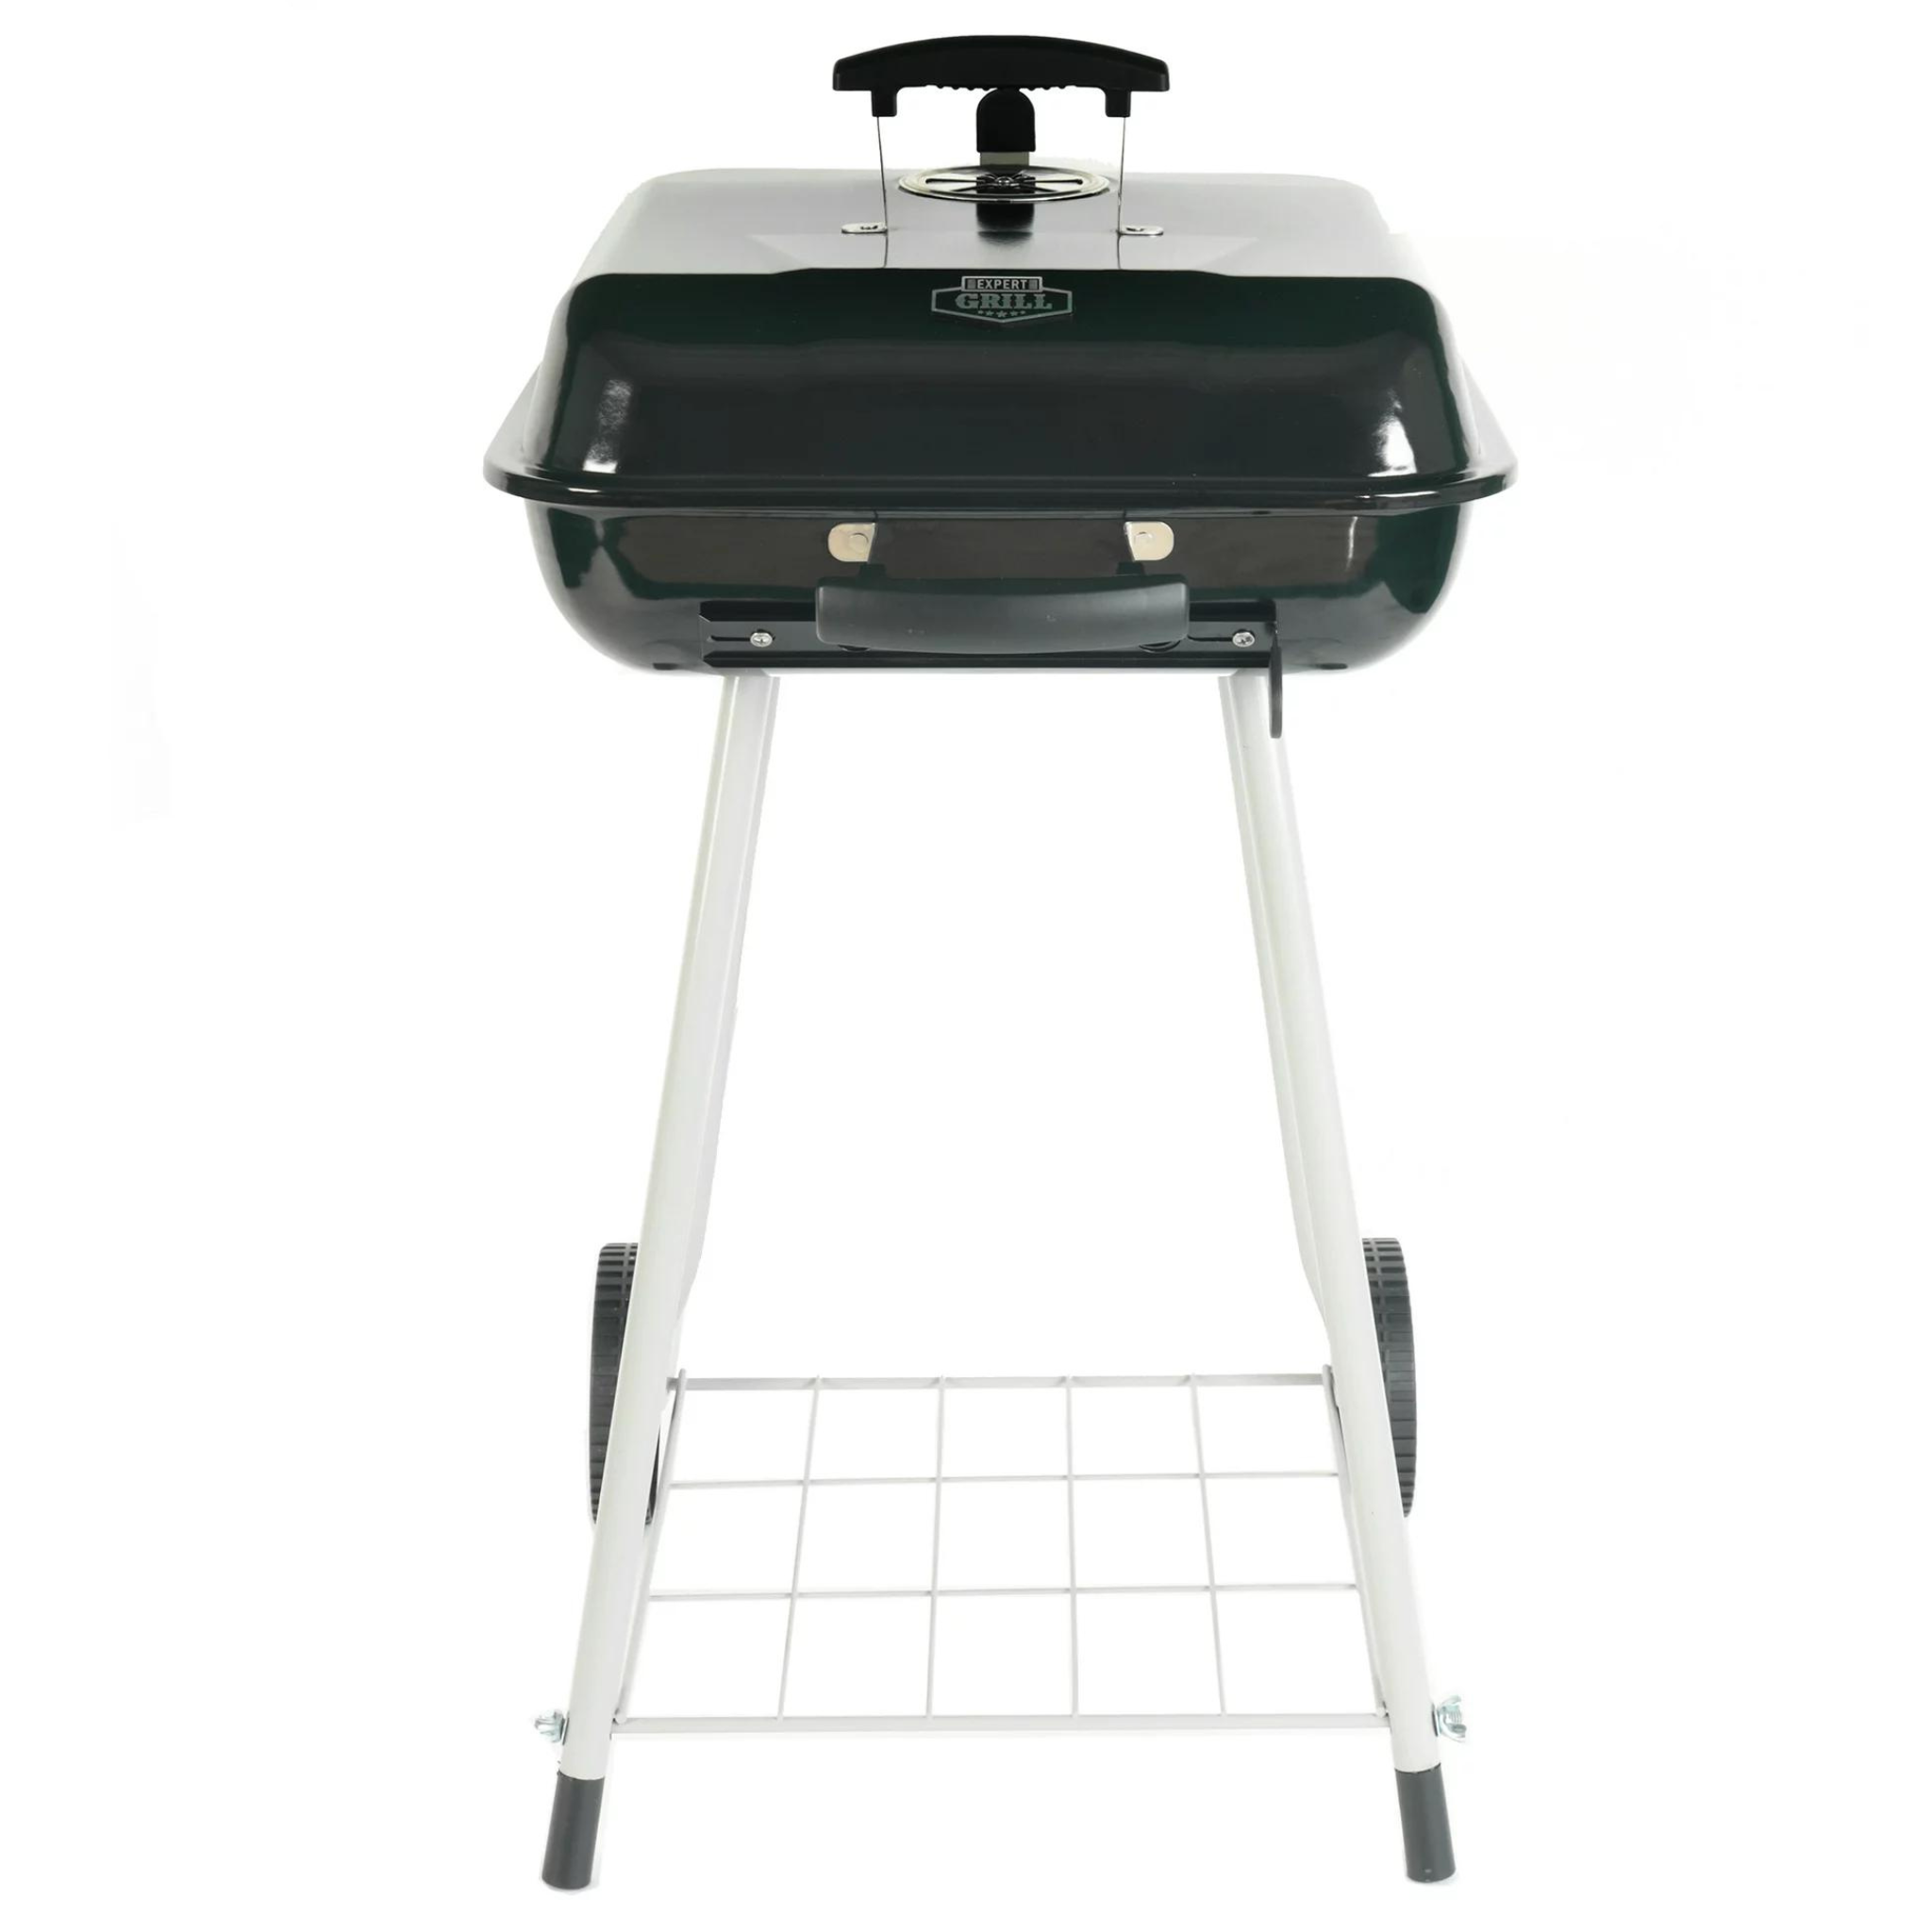 17.5" Expert Grill Square Steel Charcoal Grill w/ Wheels